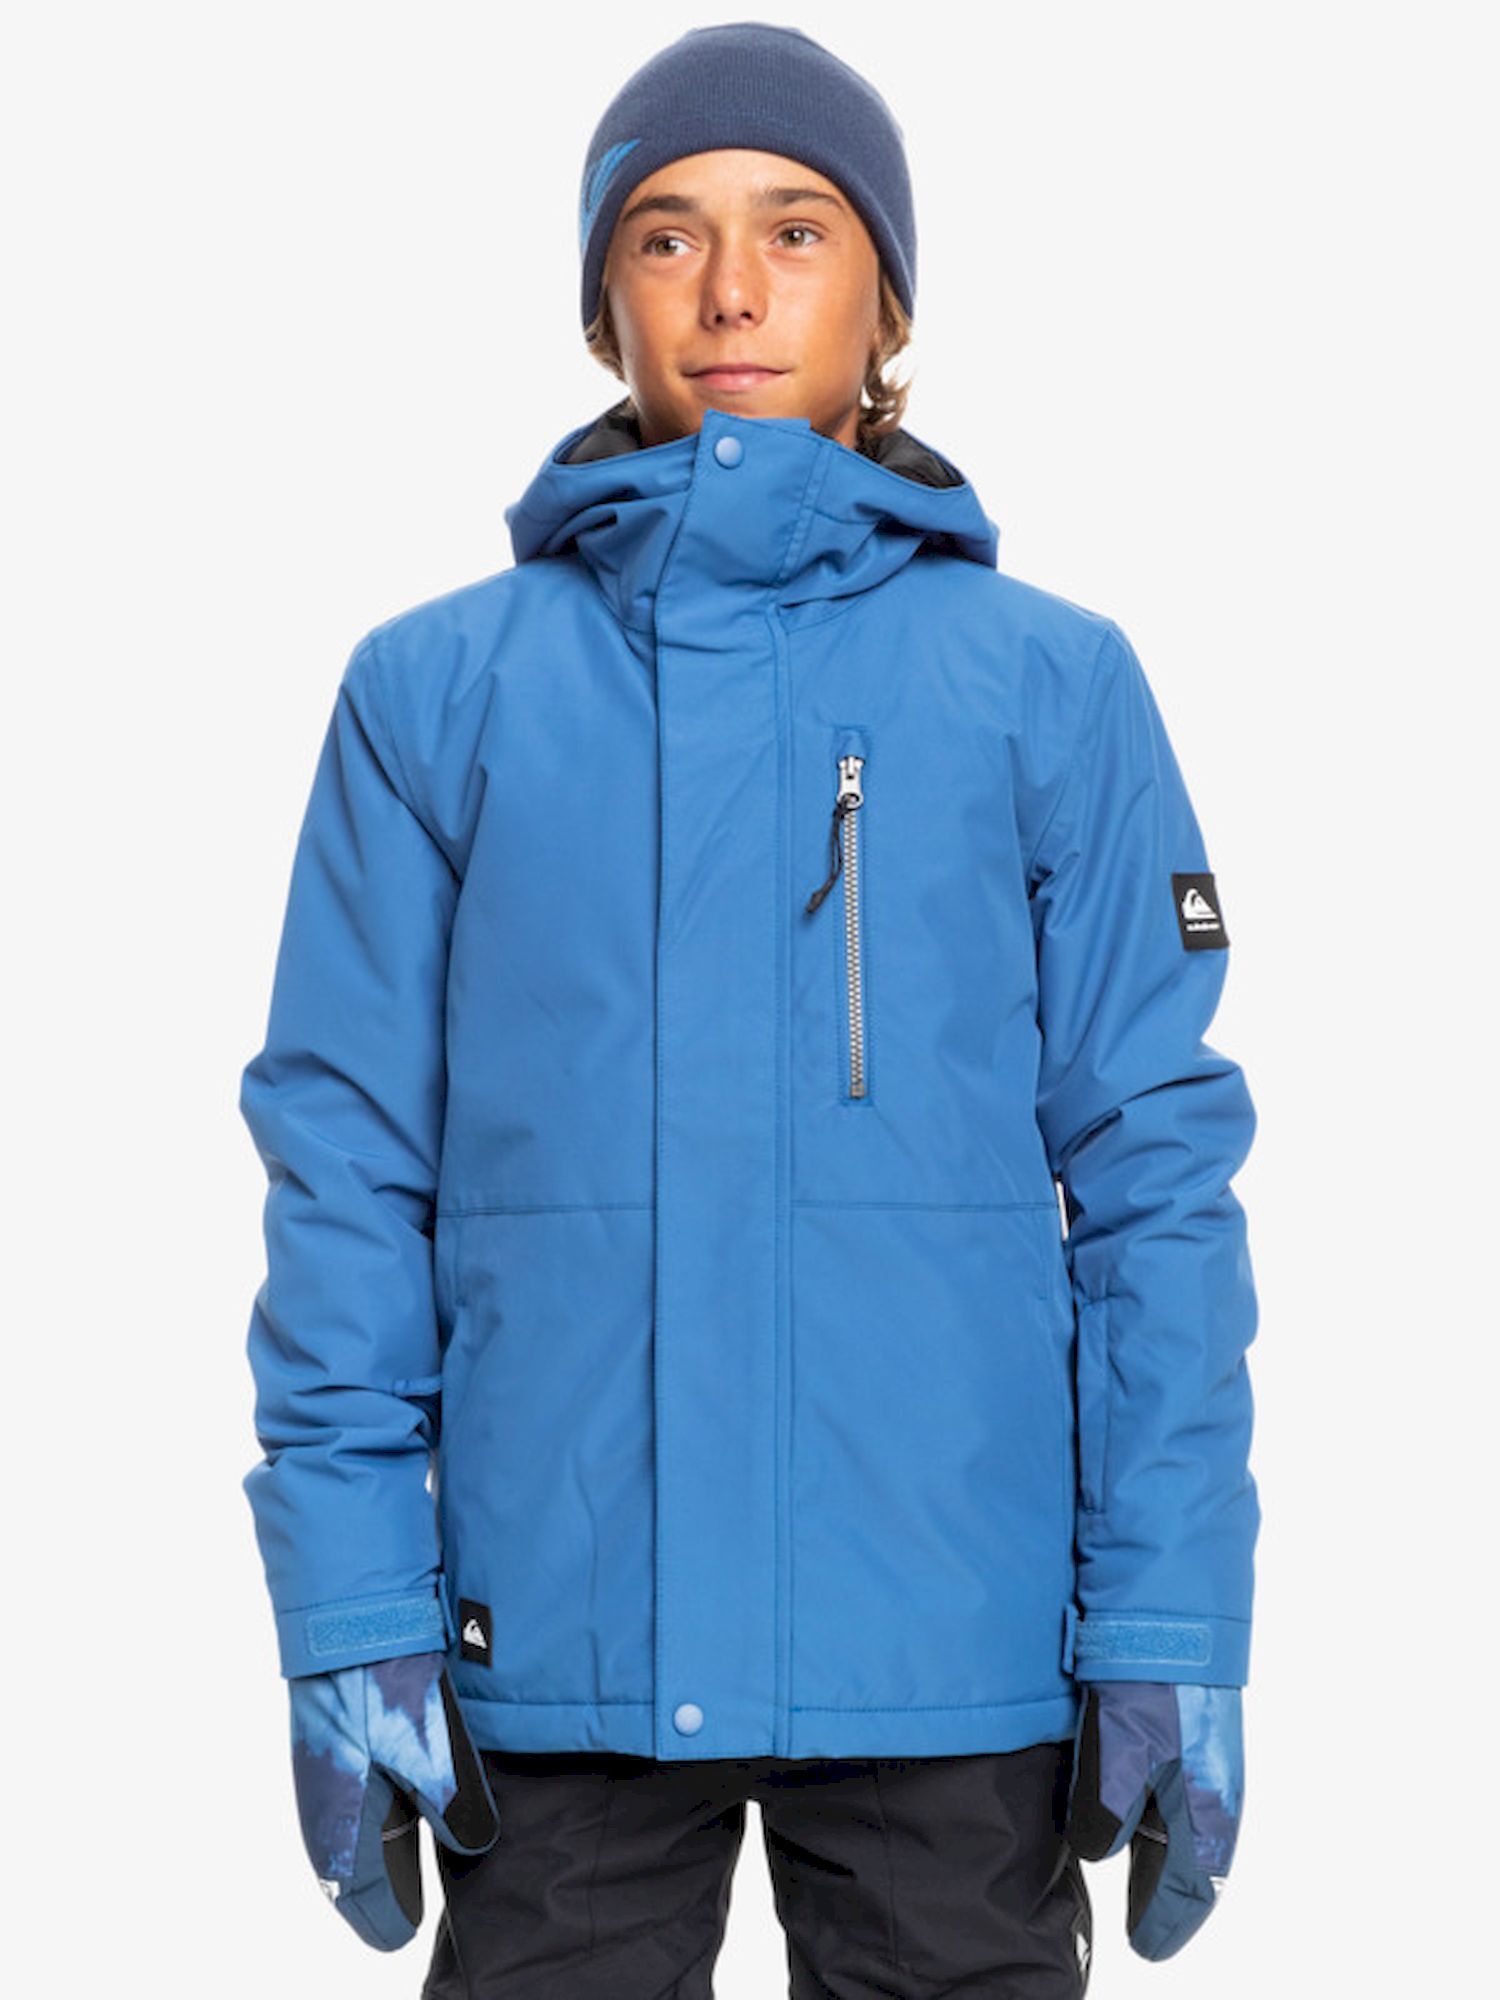 Quiksilver Mission Solid Youth Jacket - Giacca da sci - Bambino | Hardloop